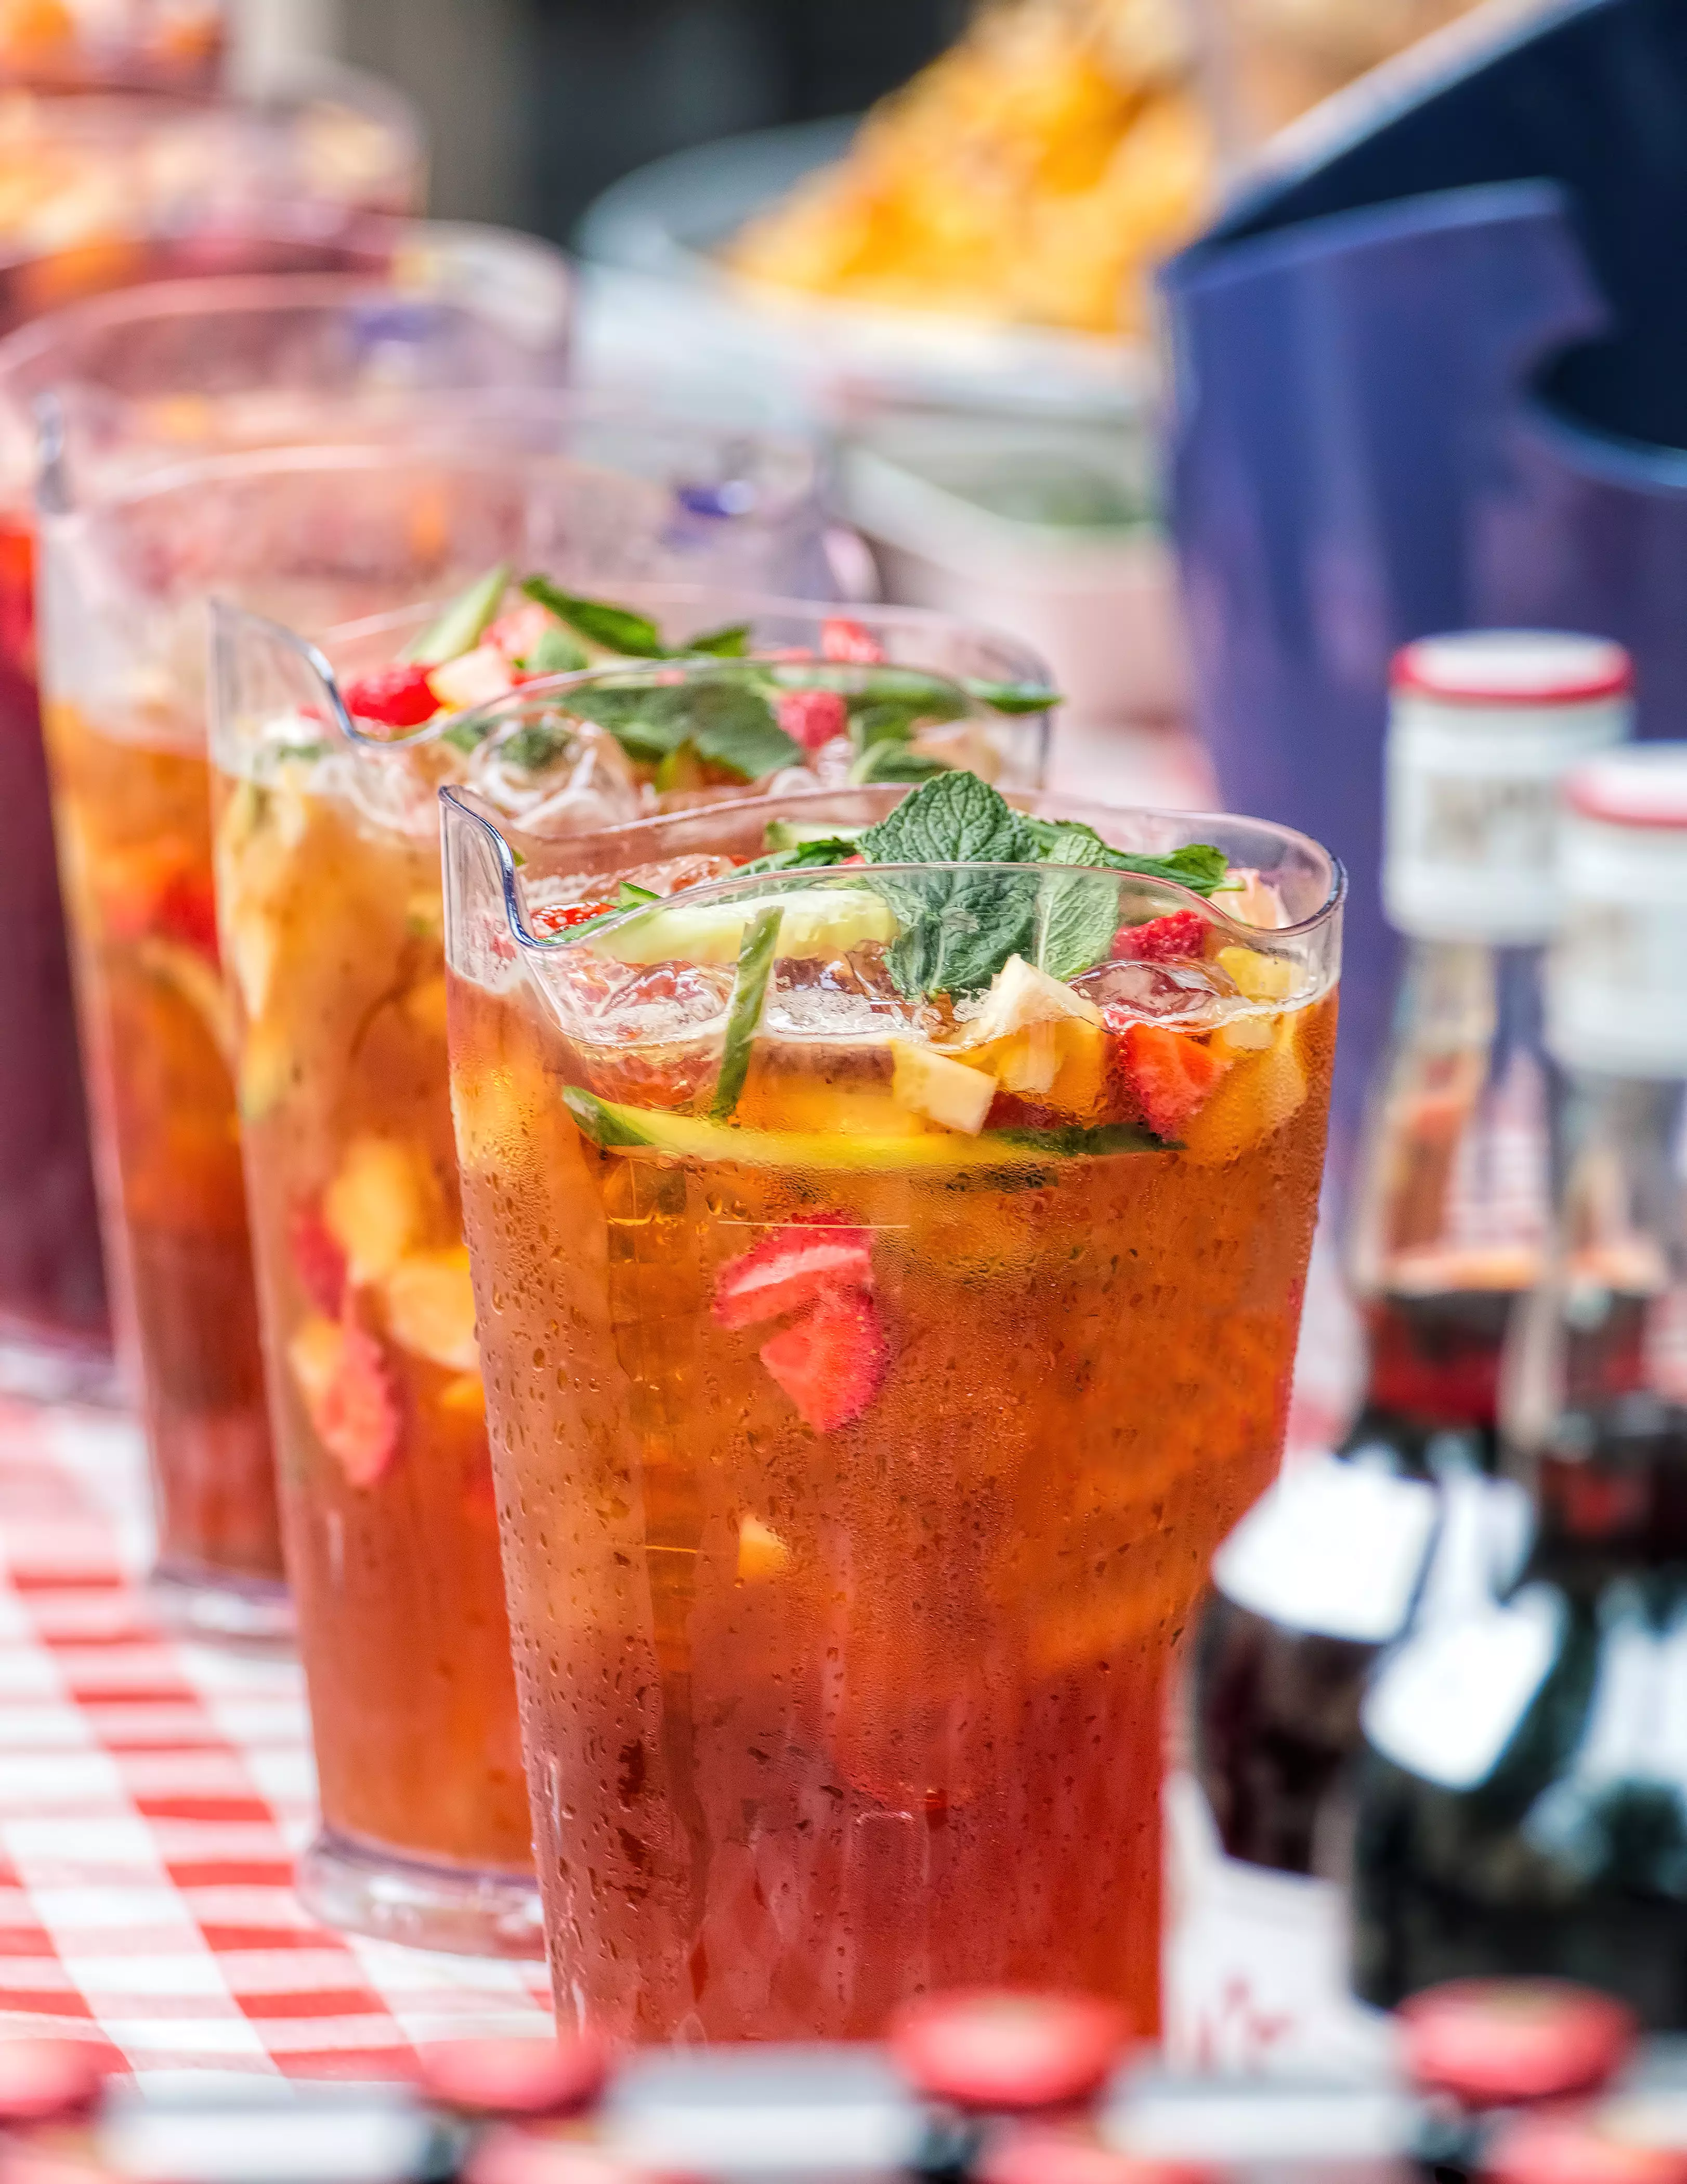 Pimm's season is almost upon us (